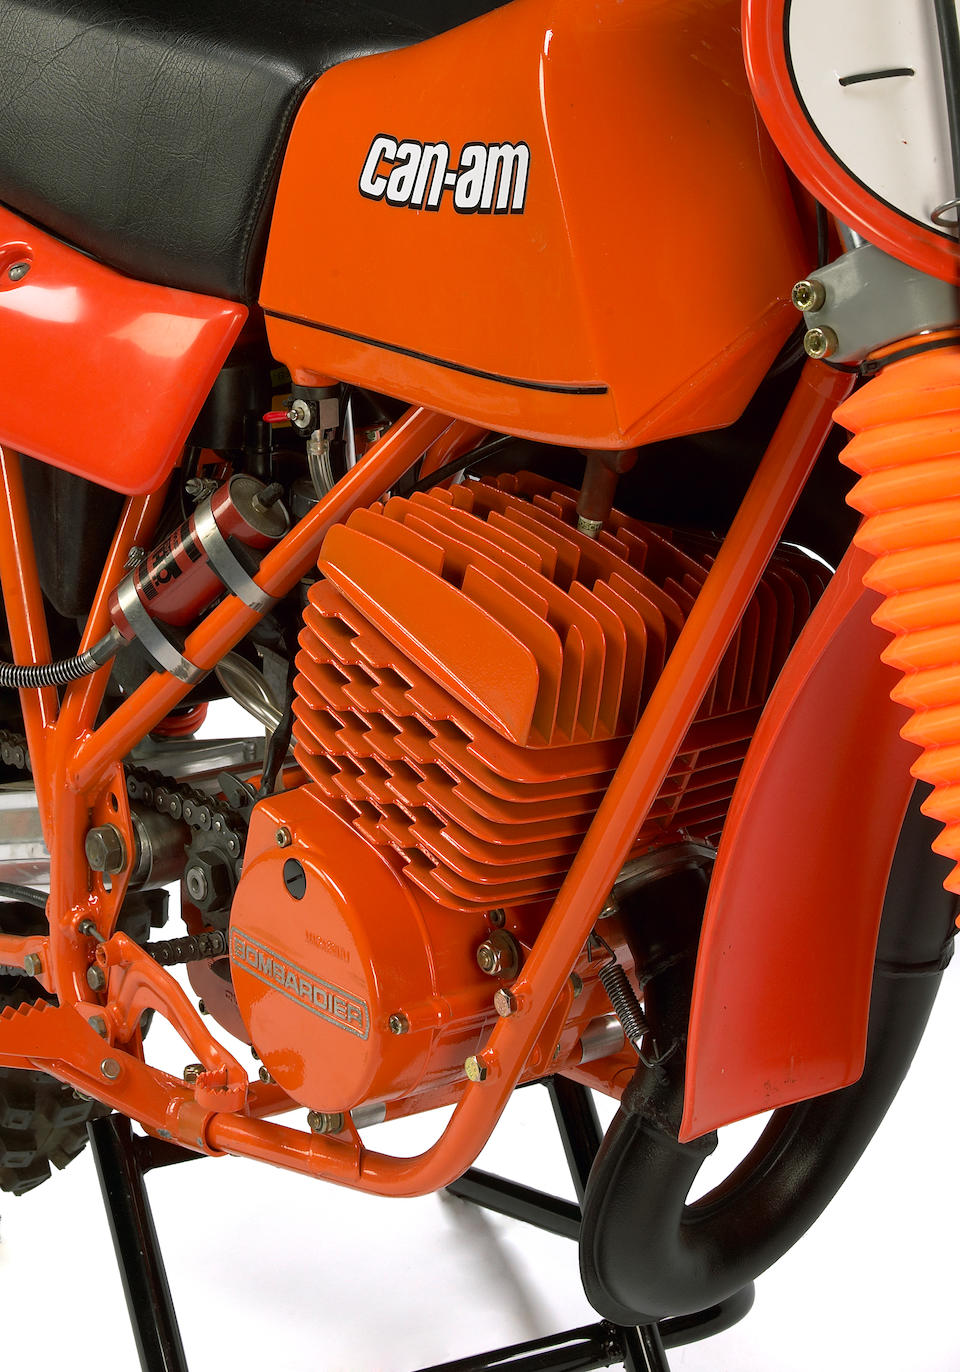 First Can-Am produced in 1980, featured in the Works broshure,1980 Can-Am 406cc MX6 Frame no. 8084000001 Engine no. 123535